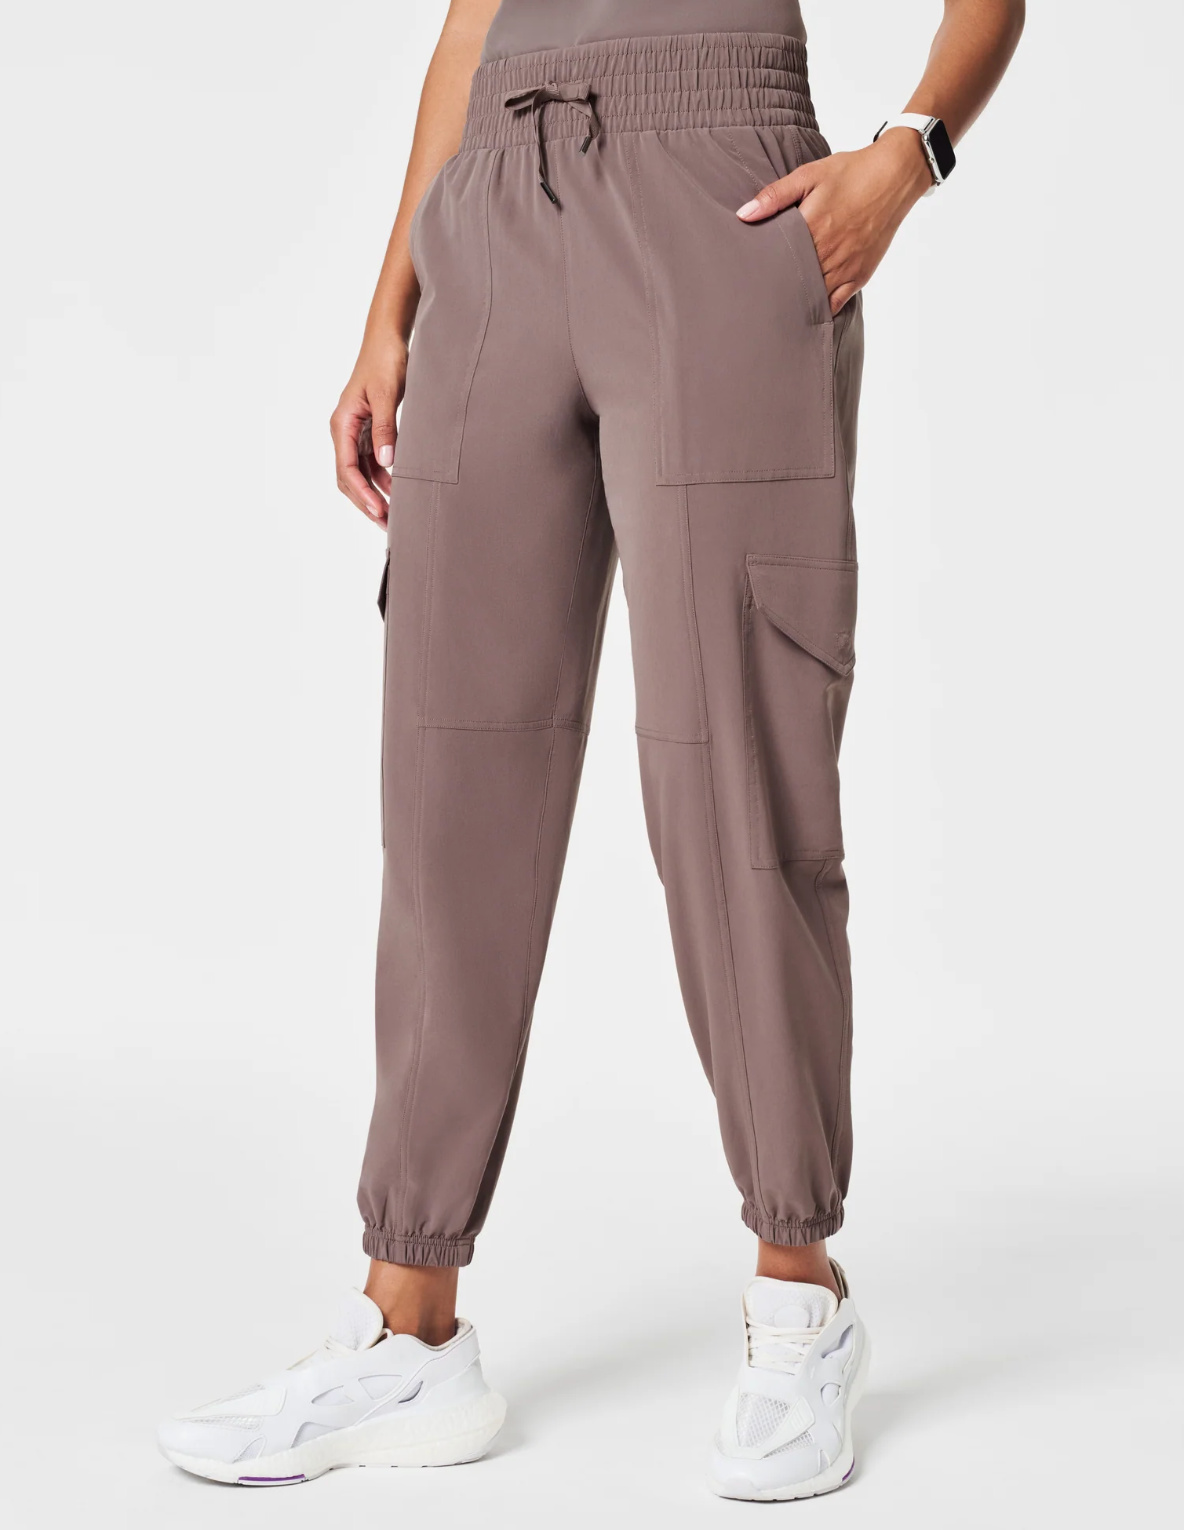 joggers-for-women